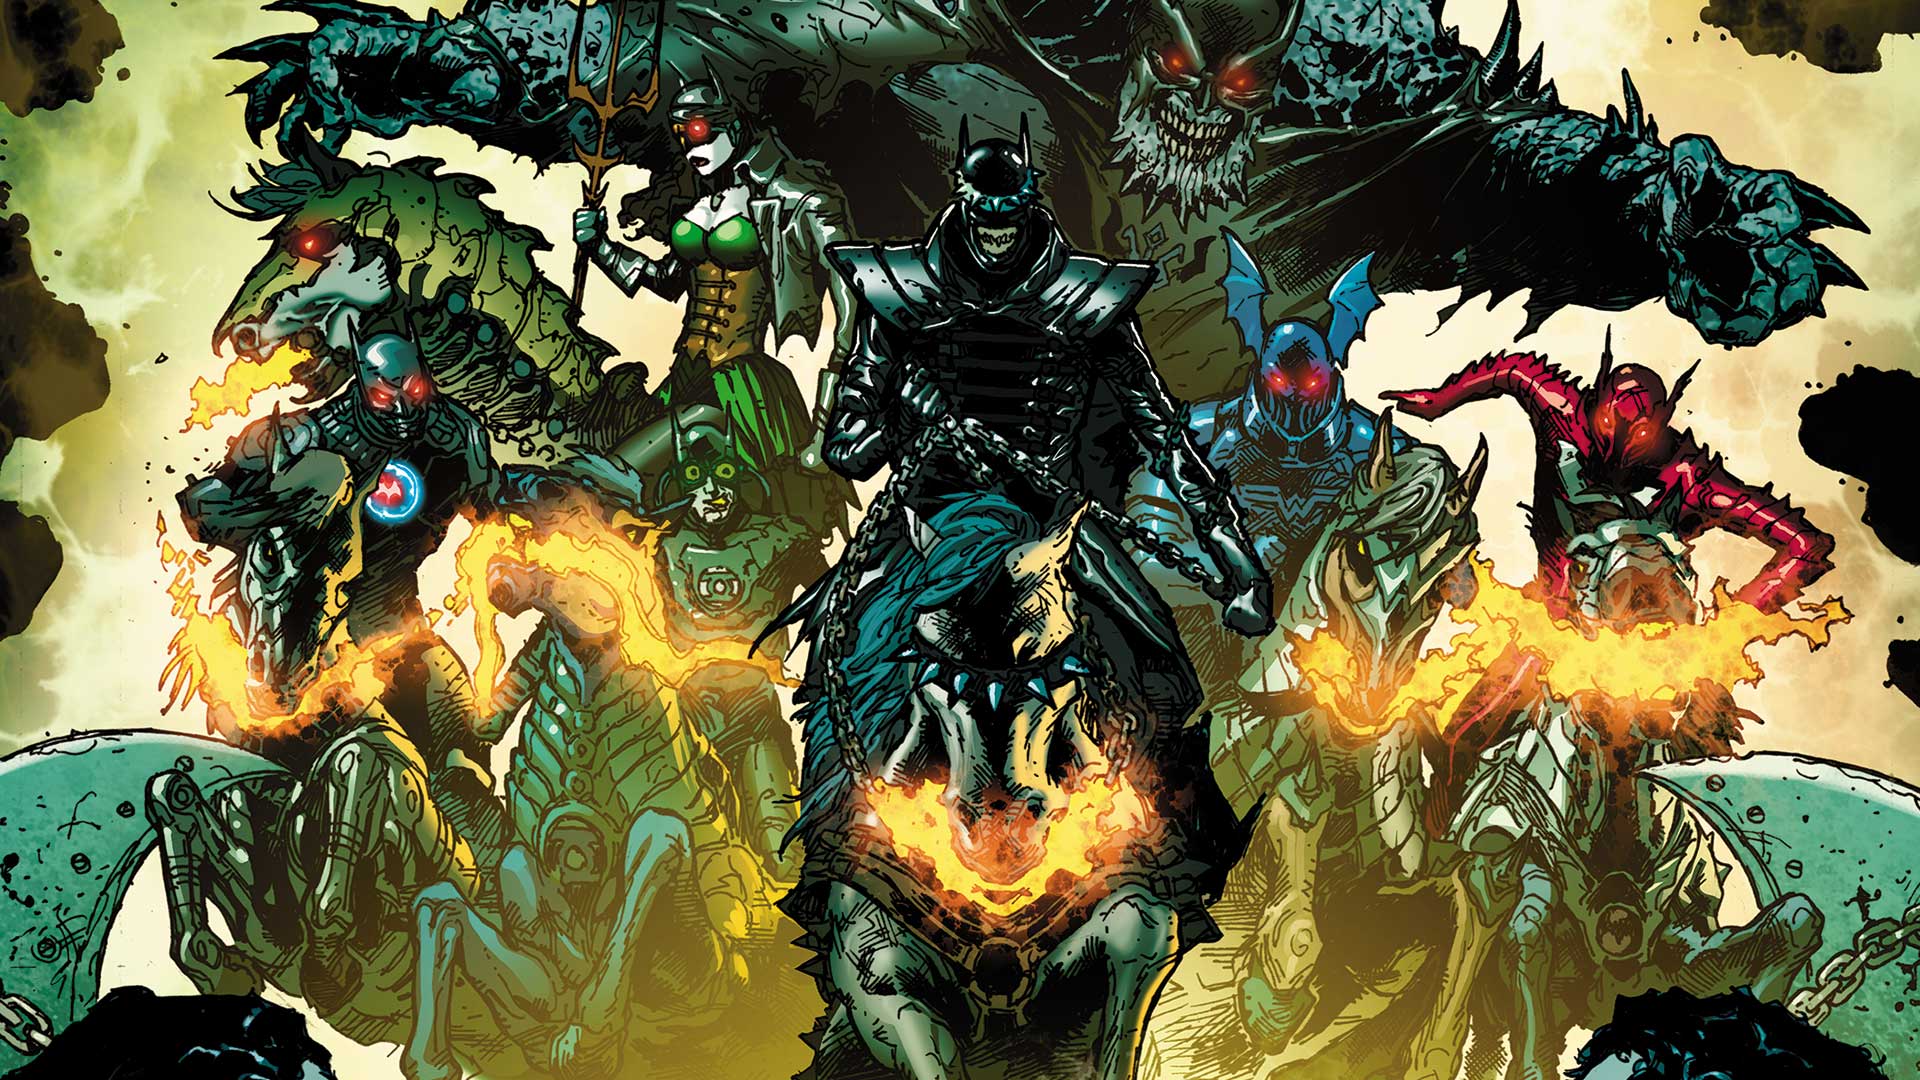 Exclusive The World Of Metal Expands In Dark Knights Rising